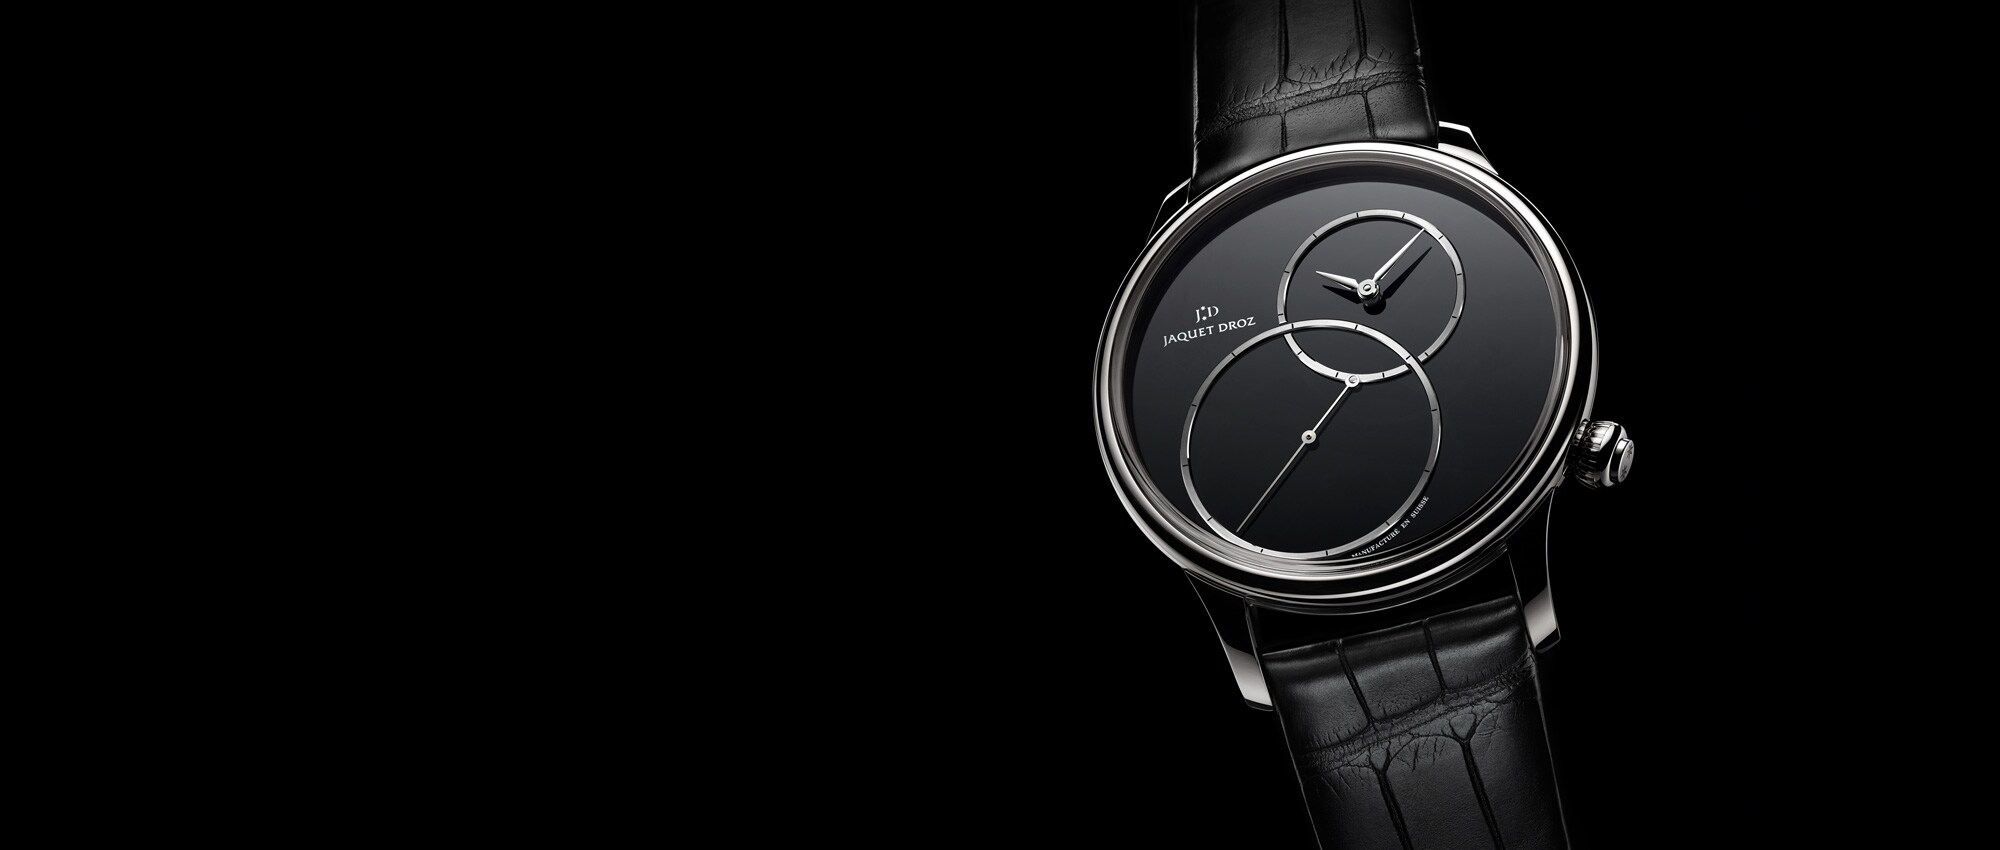 Baselworld 2016 Preview: Grande Seconde Off-Centered, the essence of black